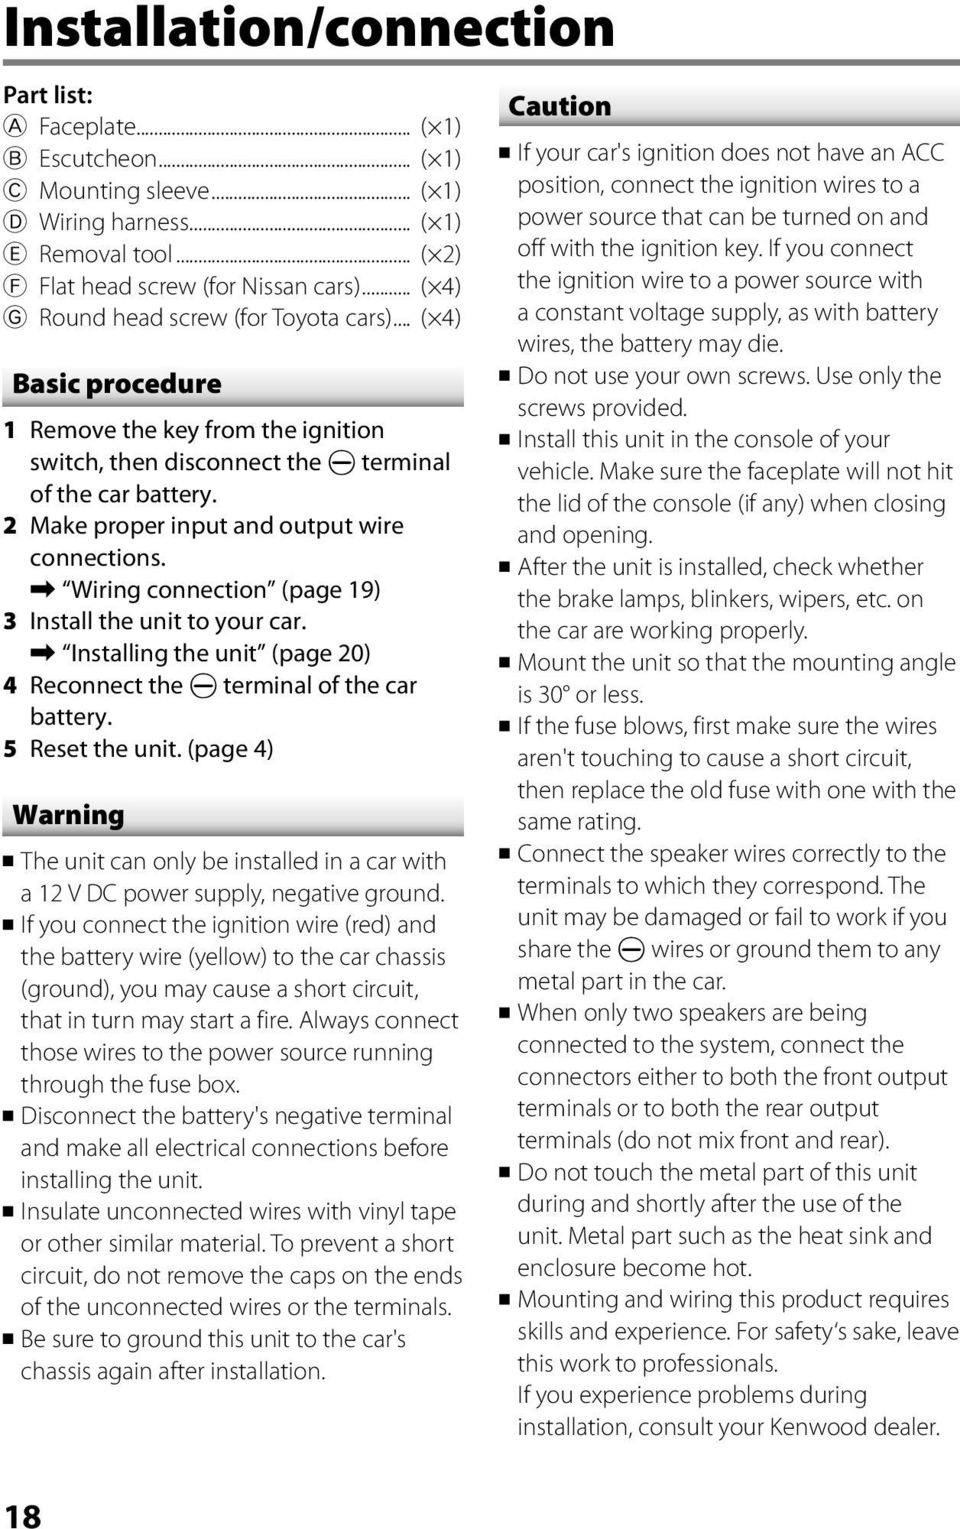 2 Make proper input and output wire connections. \ Wiring connection (page 19) 3 Install the unit to your car. \ Installing the unit (page 20) 4 Reconnect the terminal of the car battery.